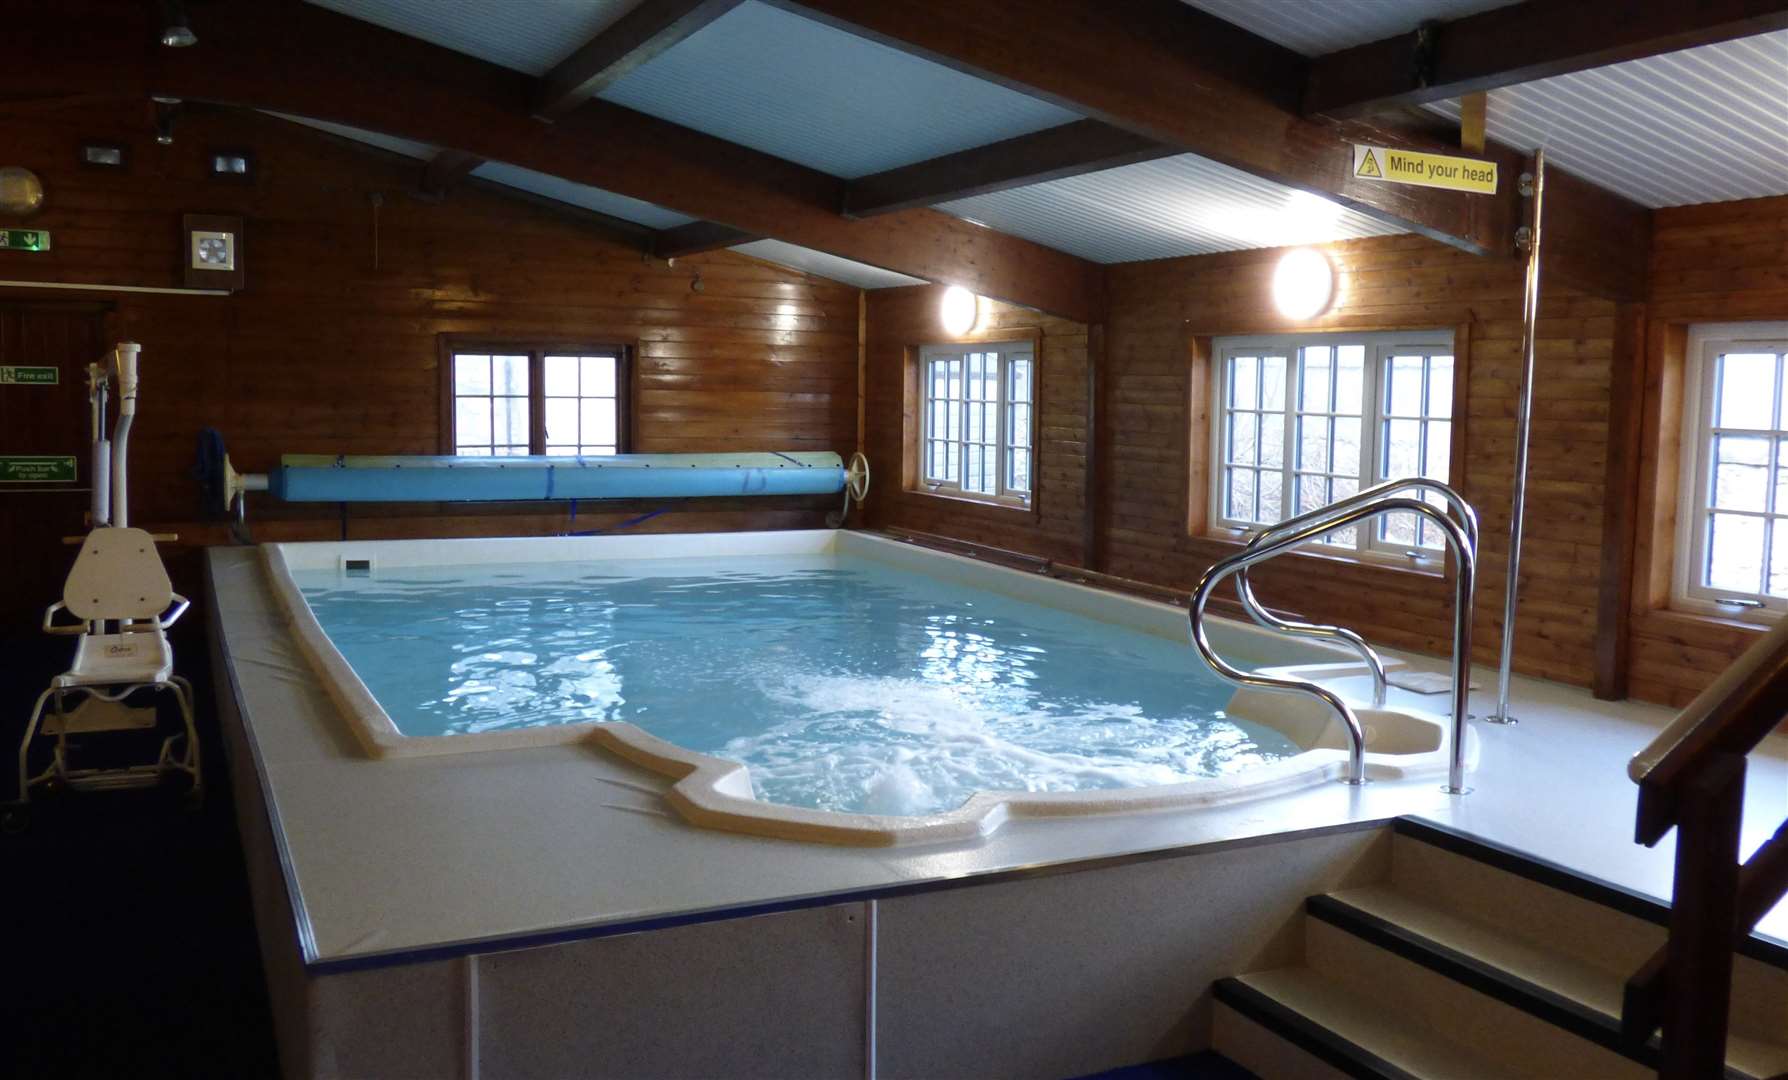 Nairn Hydroptherapy Pool